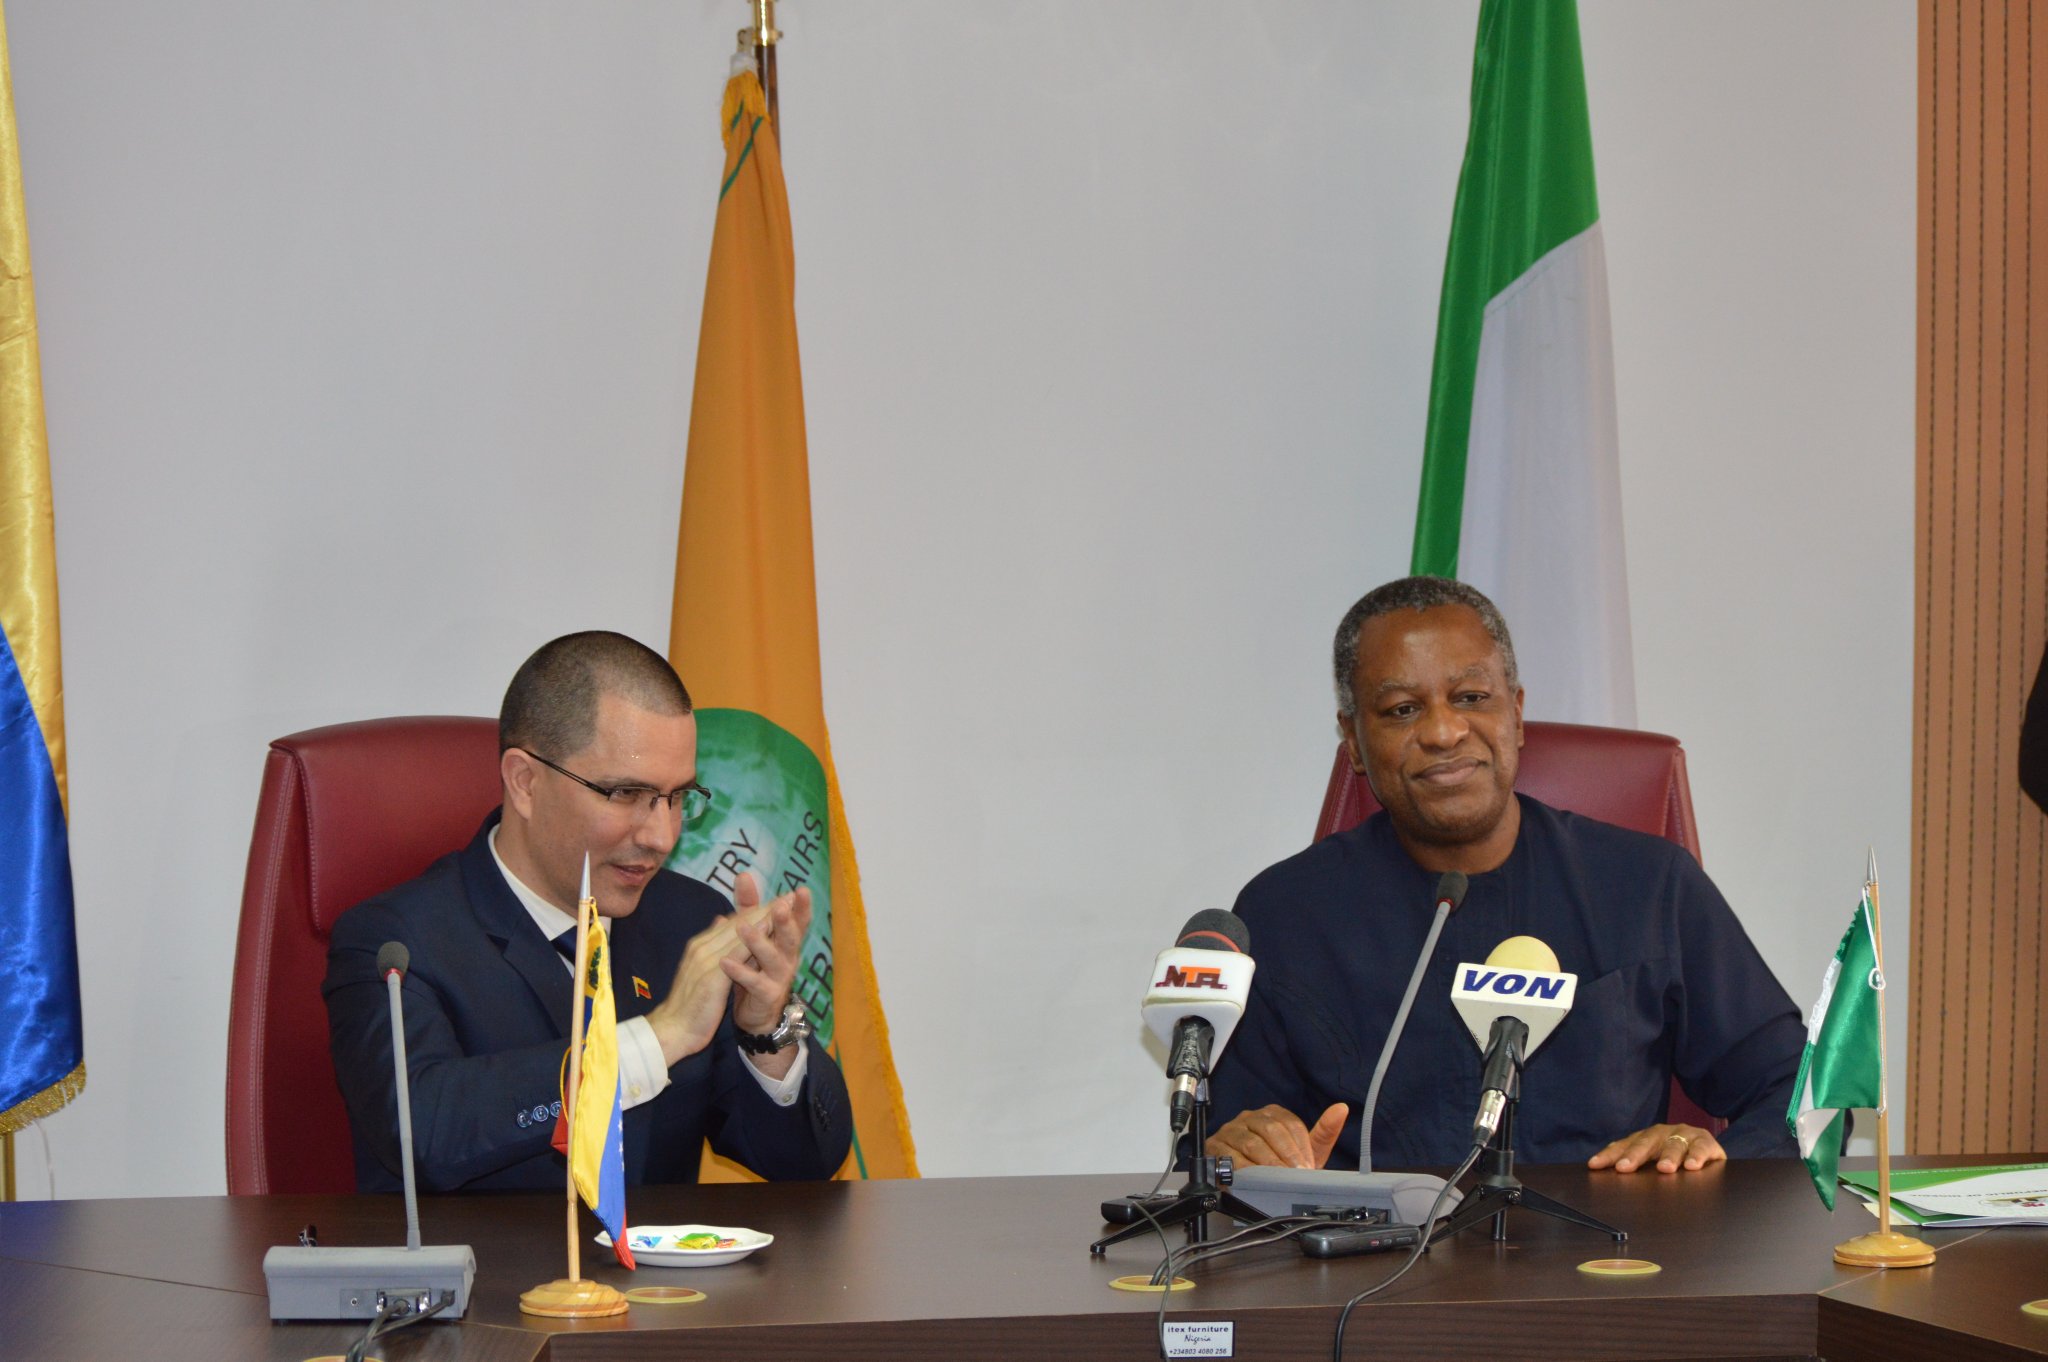 Venezuela's Foreign Minister Jorge Arreaza (left) in a meeting with Nigeria's Foreign Minister Geoffrey Onyeama (right) in Abuya, Nigeria. Feb. 19, 2018.